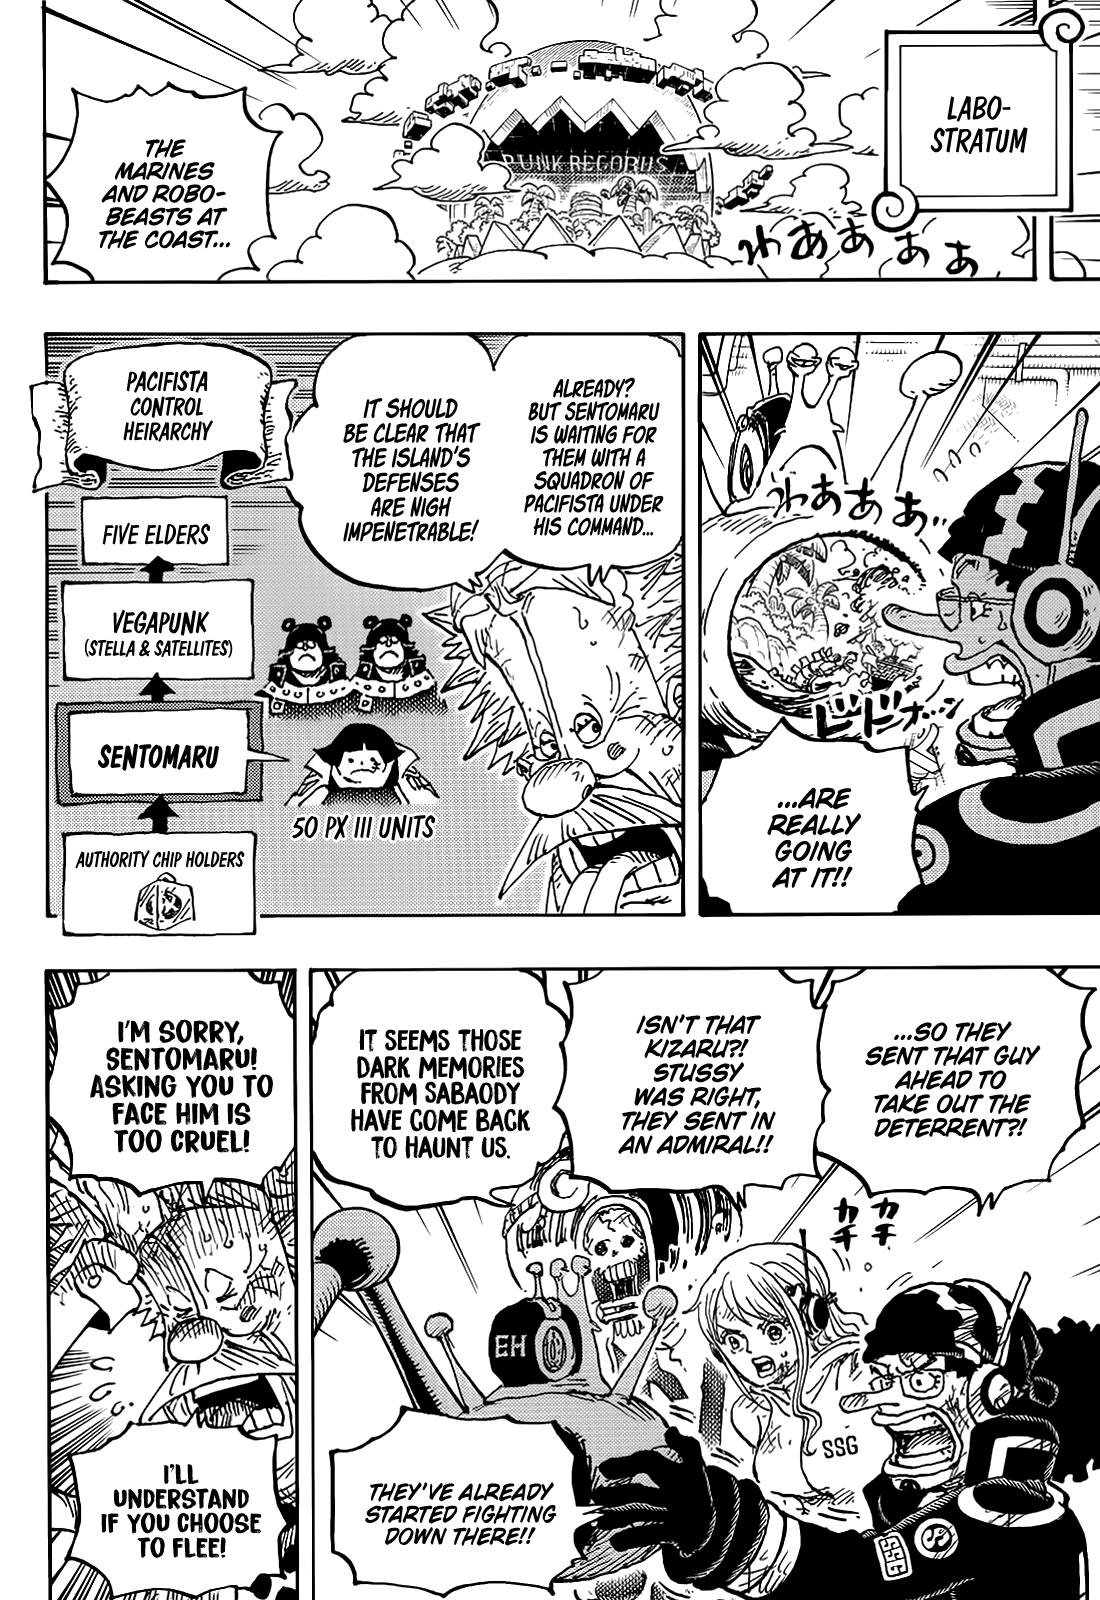 One Piece, Chapter 1093  TcbScans Org - Free Manga Online in High Quality